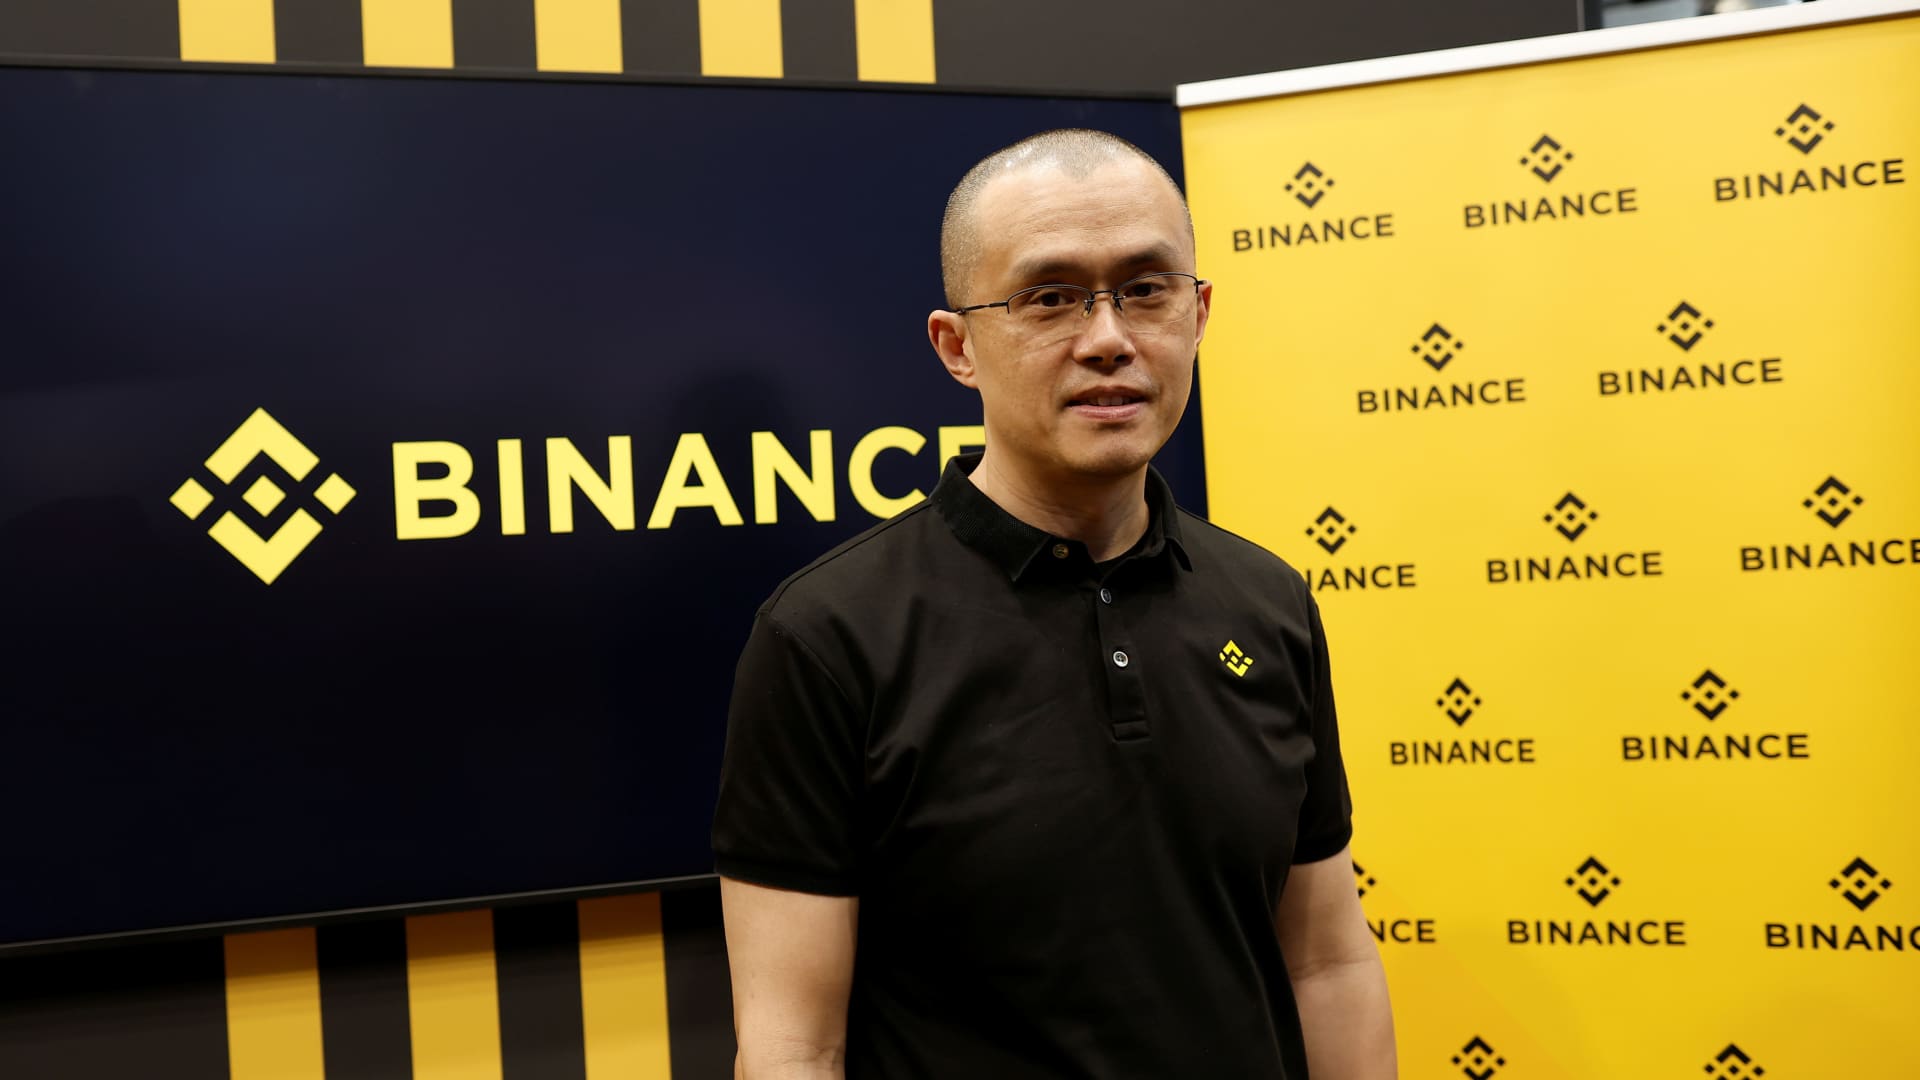 Have refused to let Binance founder Zhao saunter back and forth to UAE despite his supply to make bid of equity as security